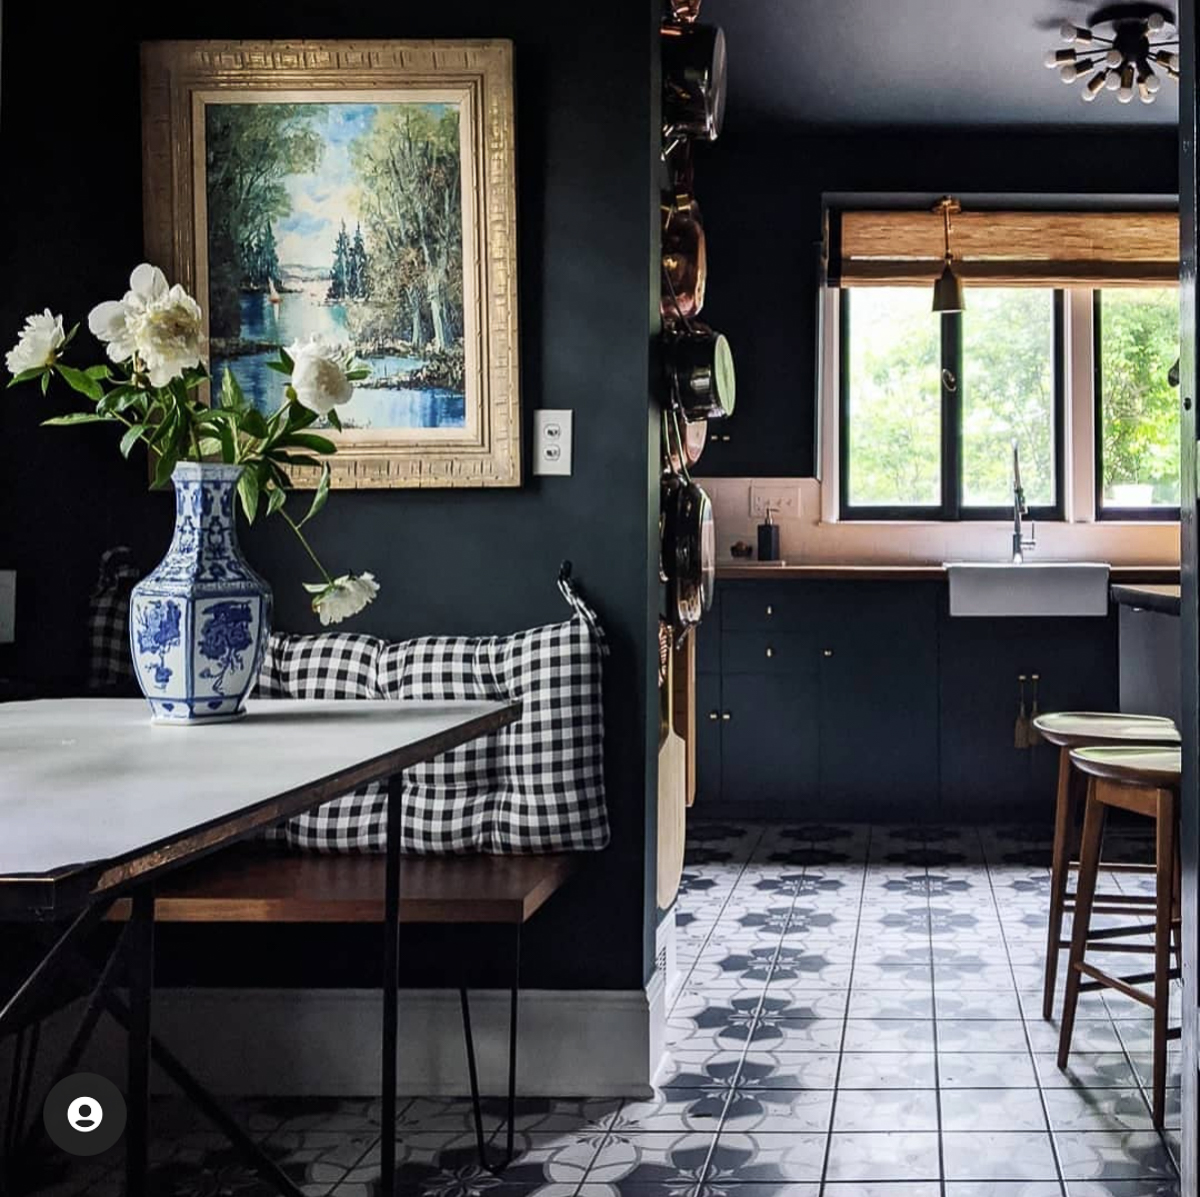 Love this vintage modern kitchen renovation and dramatic dark paint color